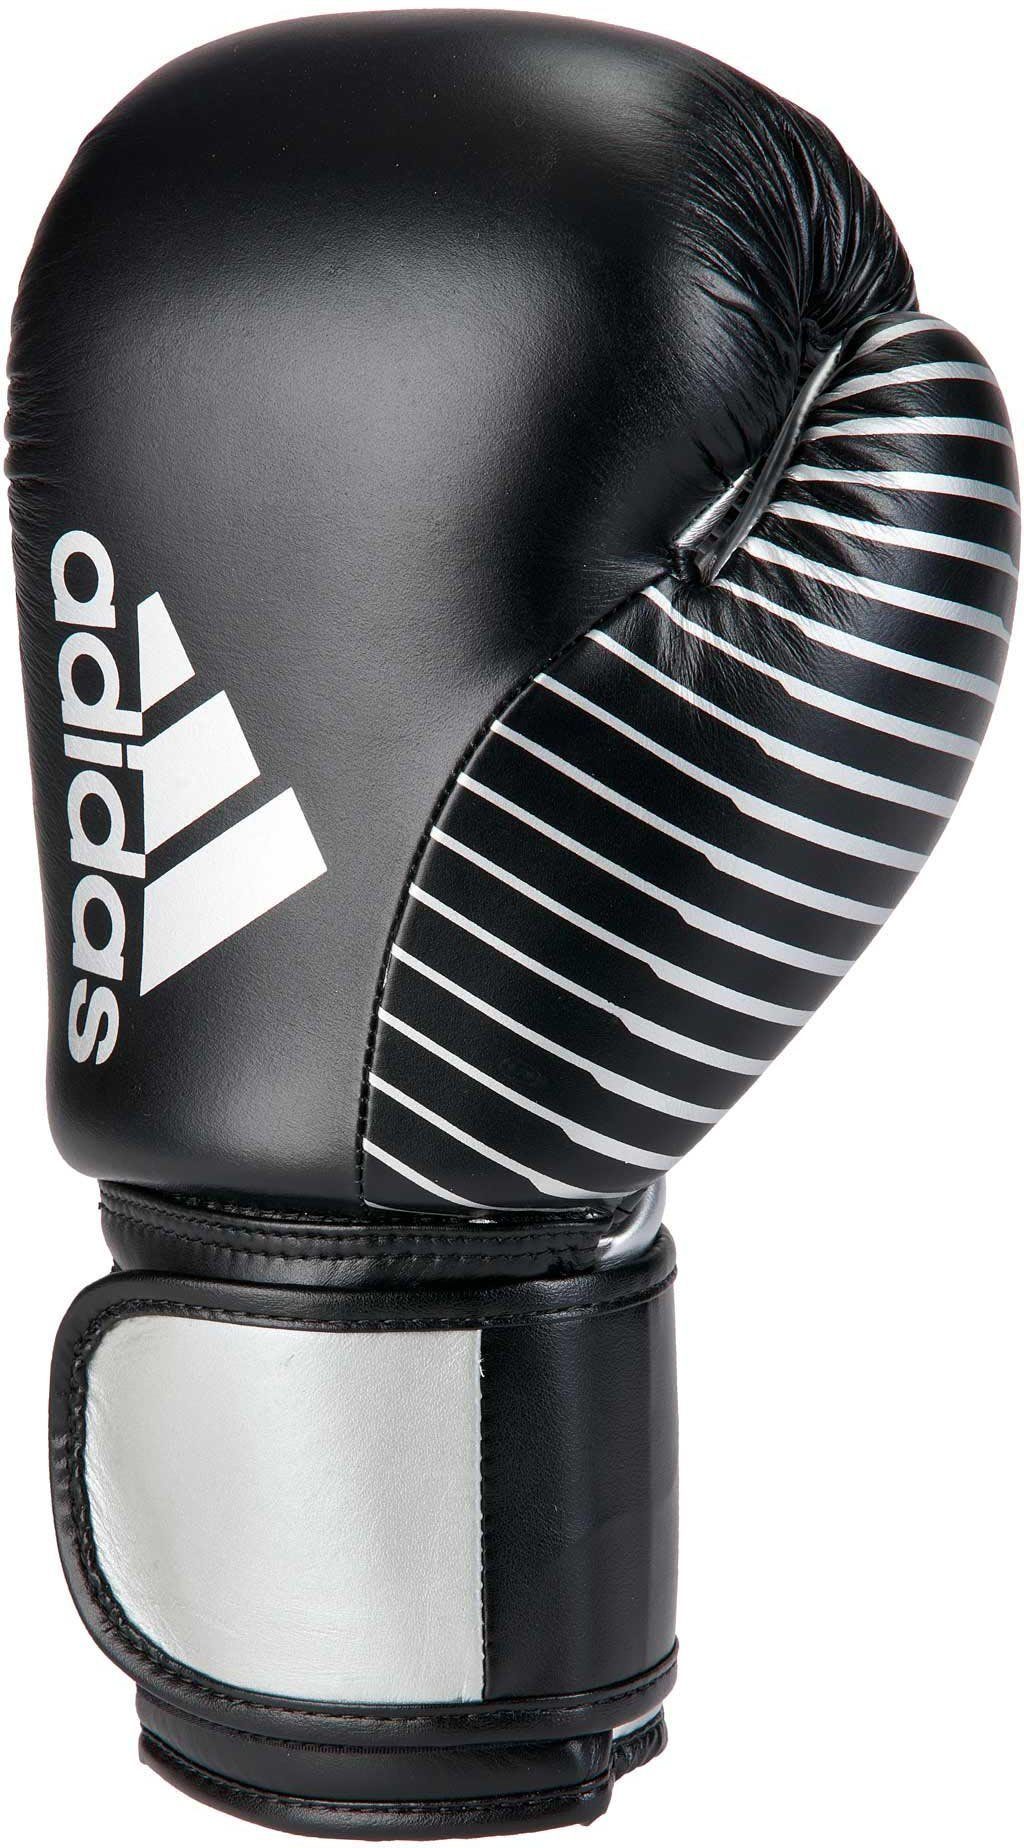 Competition Handschuh black/silver adidas Performance Boxhandschuhe